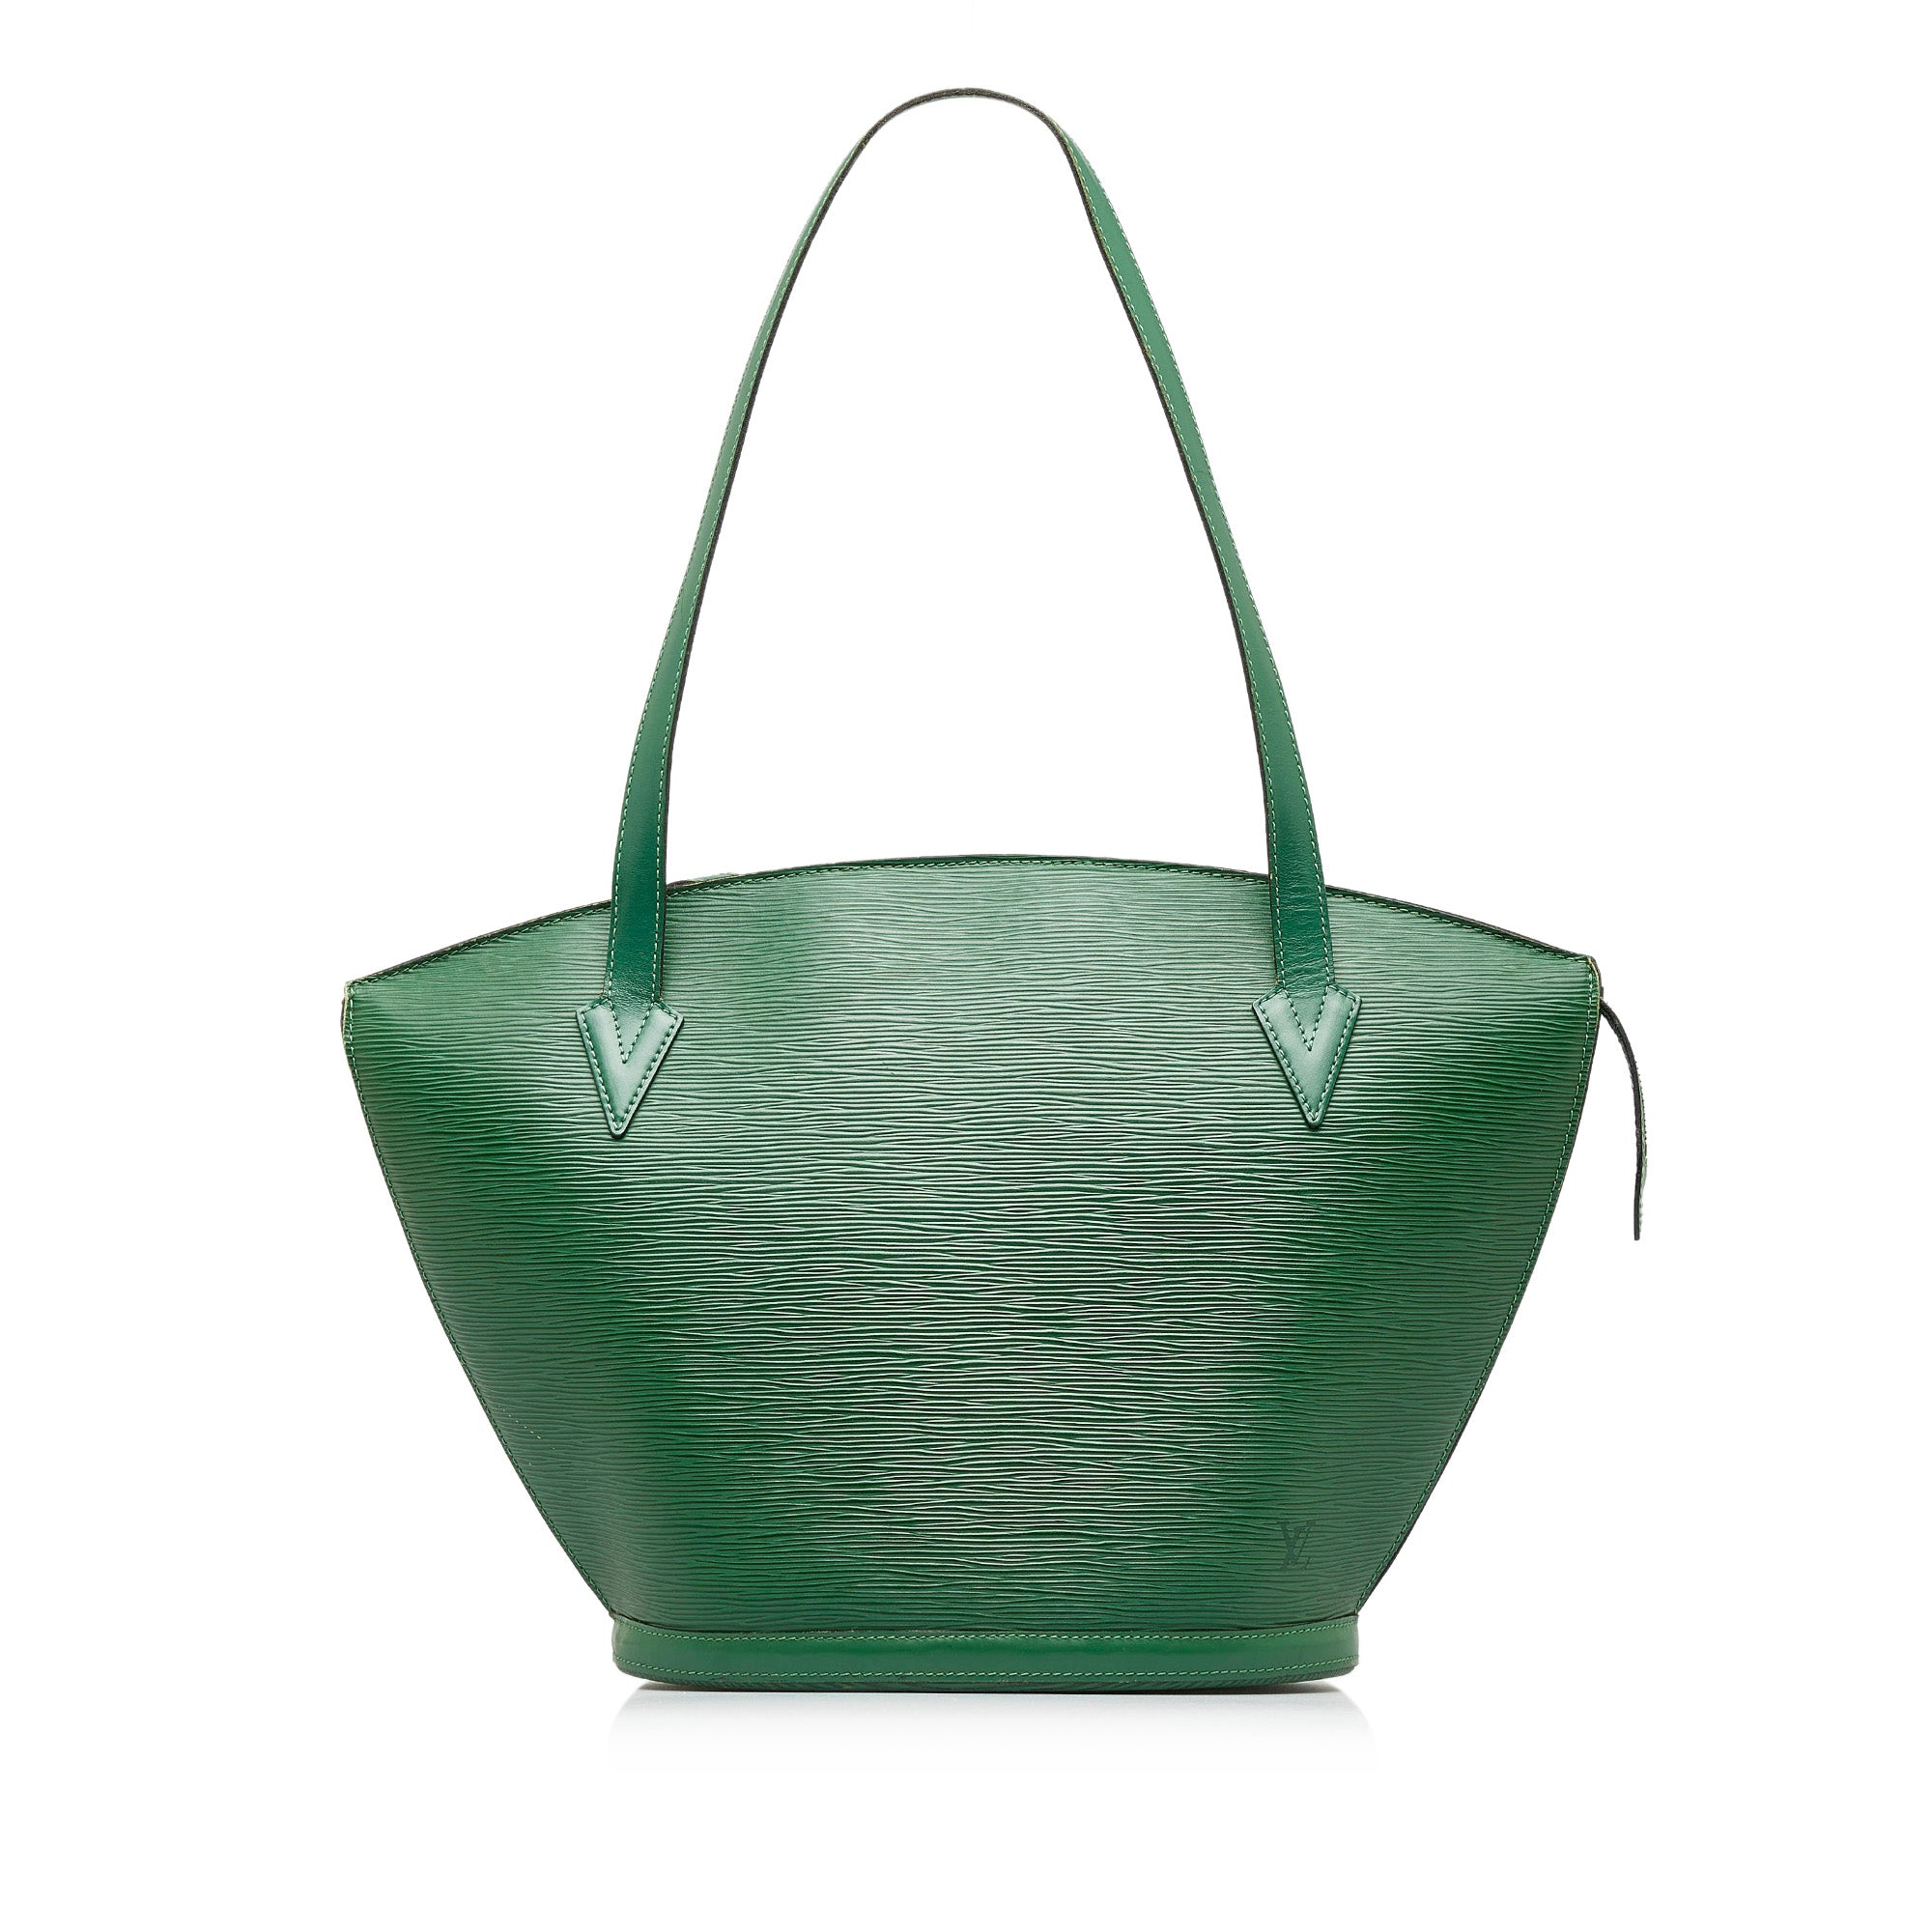 louis vuitton bag with green strap